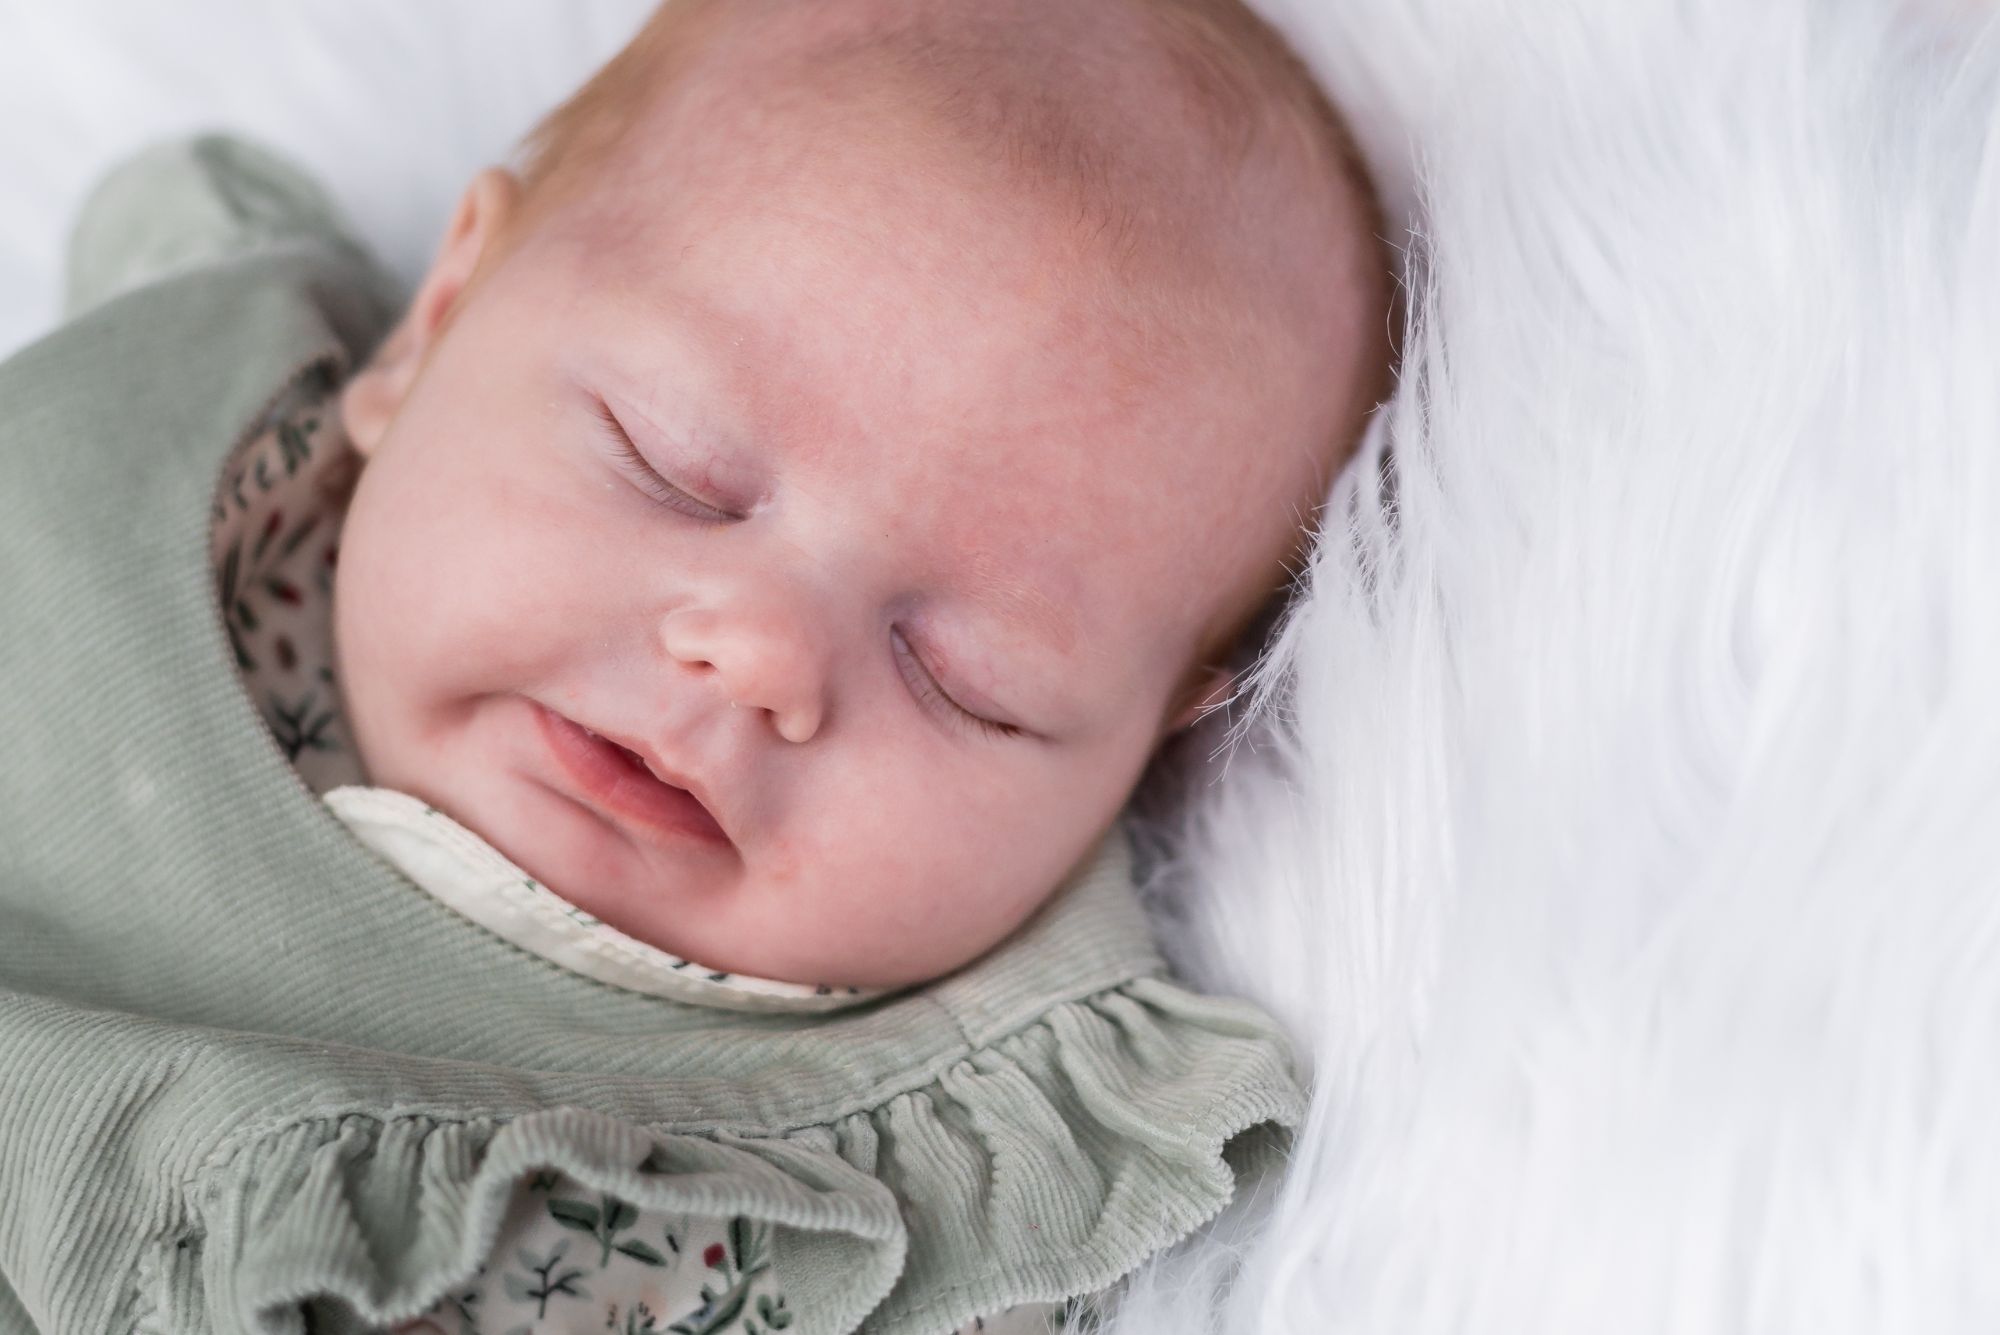 An eight week old baby at her newborn photoshoot lies on a fluffy white blanket and sleeps